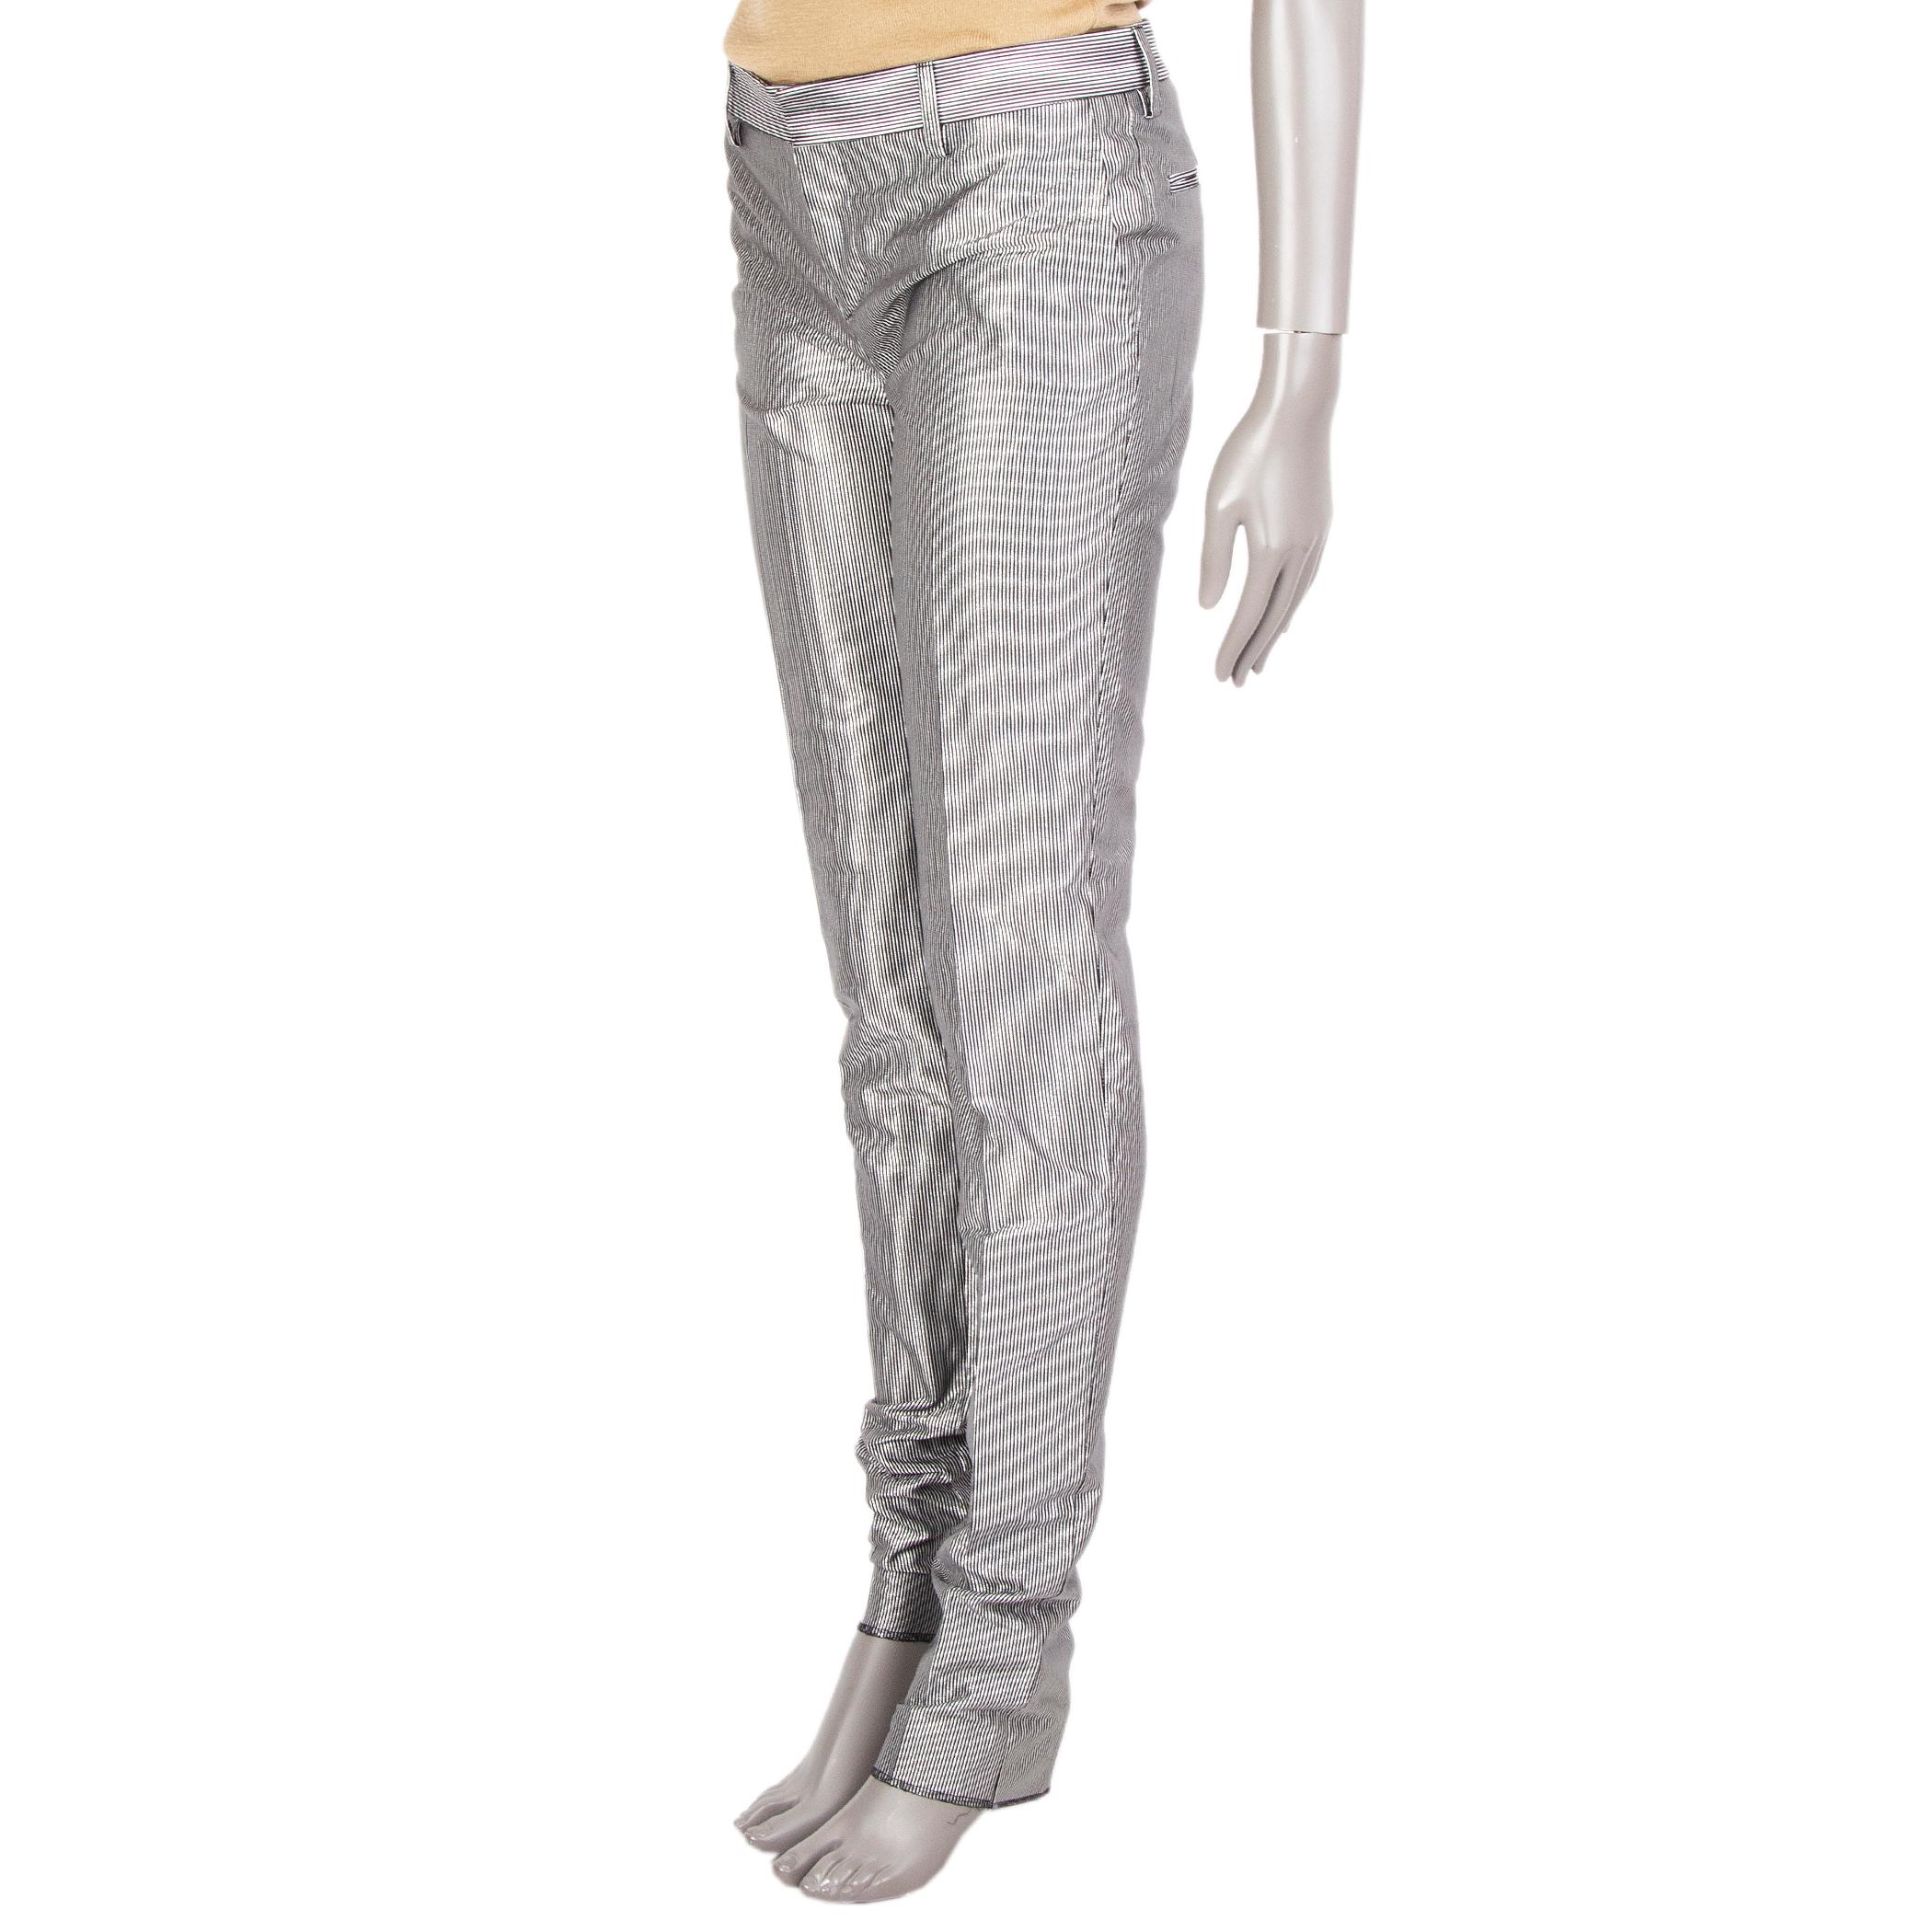 100% authentic Saint Lauren metallic-stripe pants in silver-black, polyester (73%), silk (27%). With a tapered leg, two slant pockets in the front, belt loops and two slash pockets in the back. Closes with a hidden hook and bar fastening. Unlined.